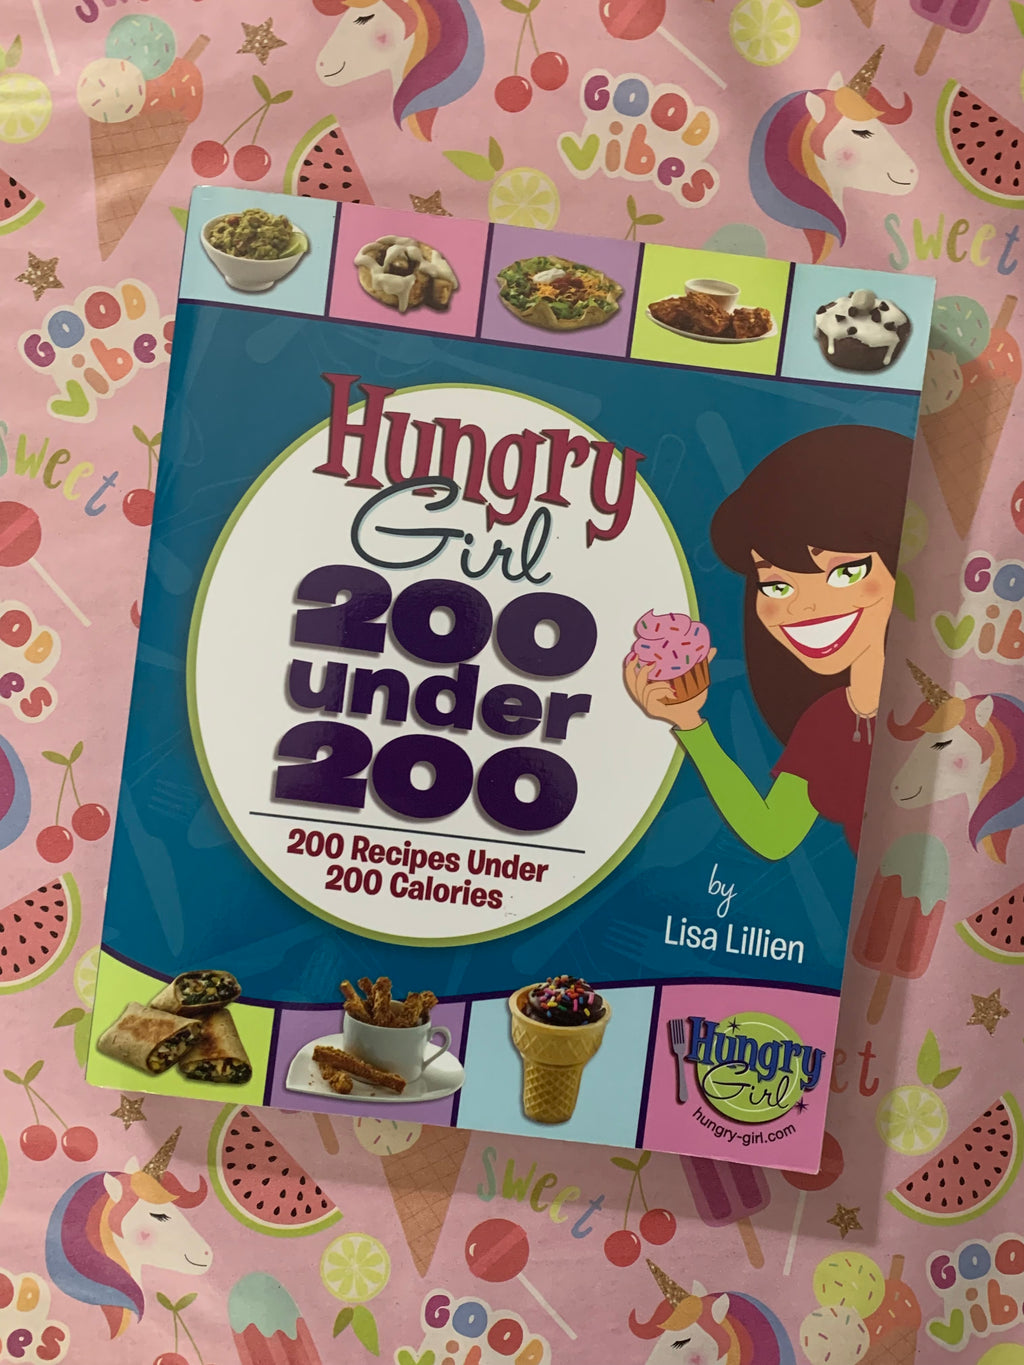 Hungry Girl 200 Under 200: 200 Recipes Under 200 Calories- By Lisa Lillien